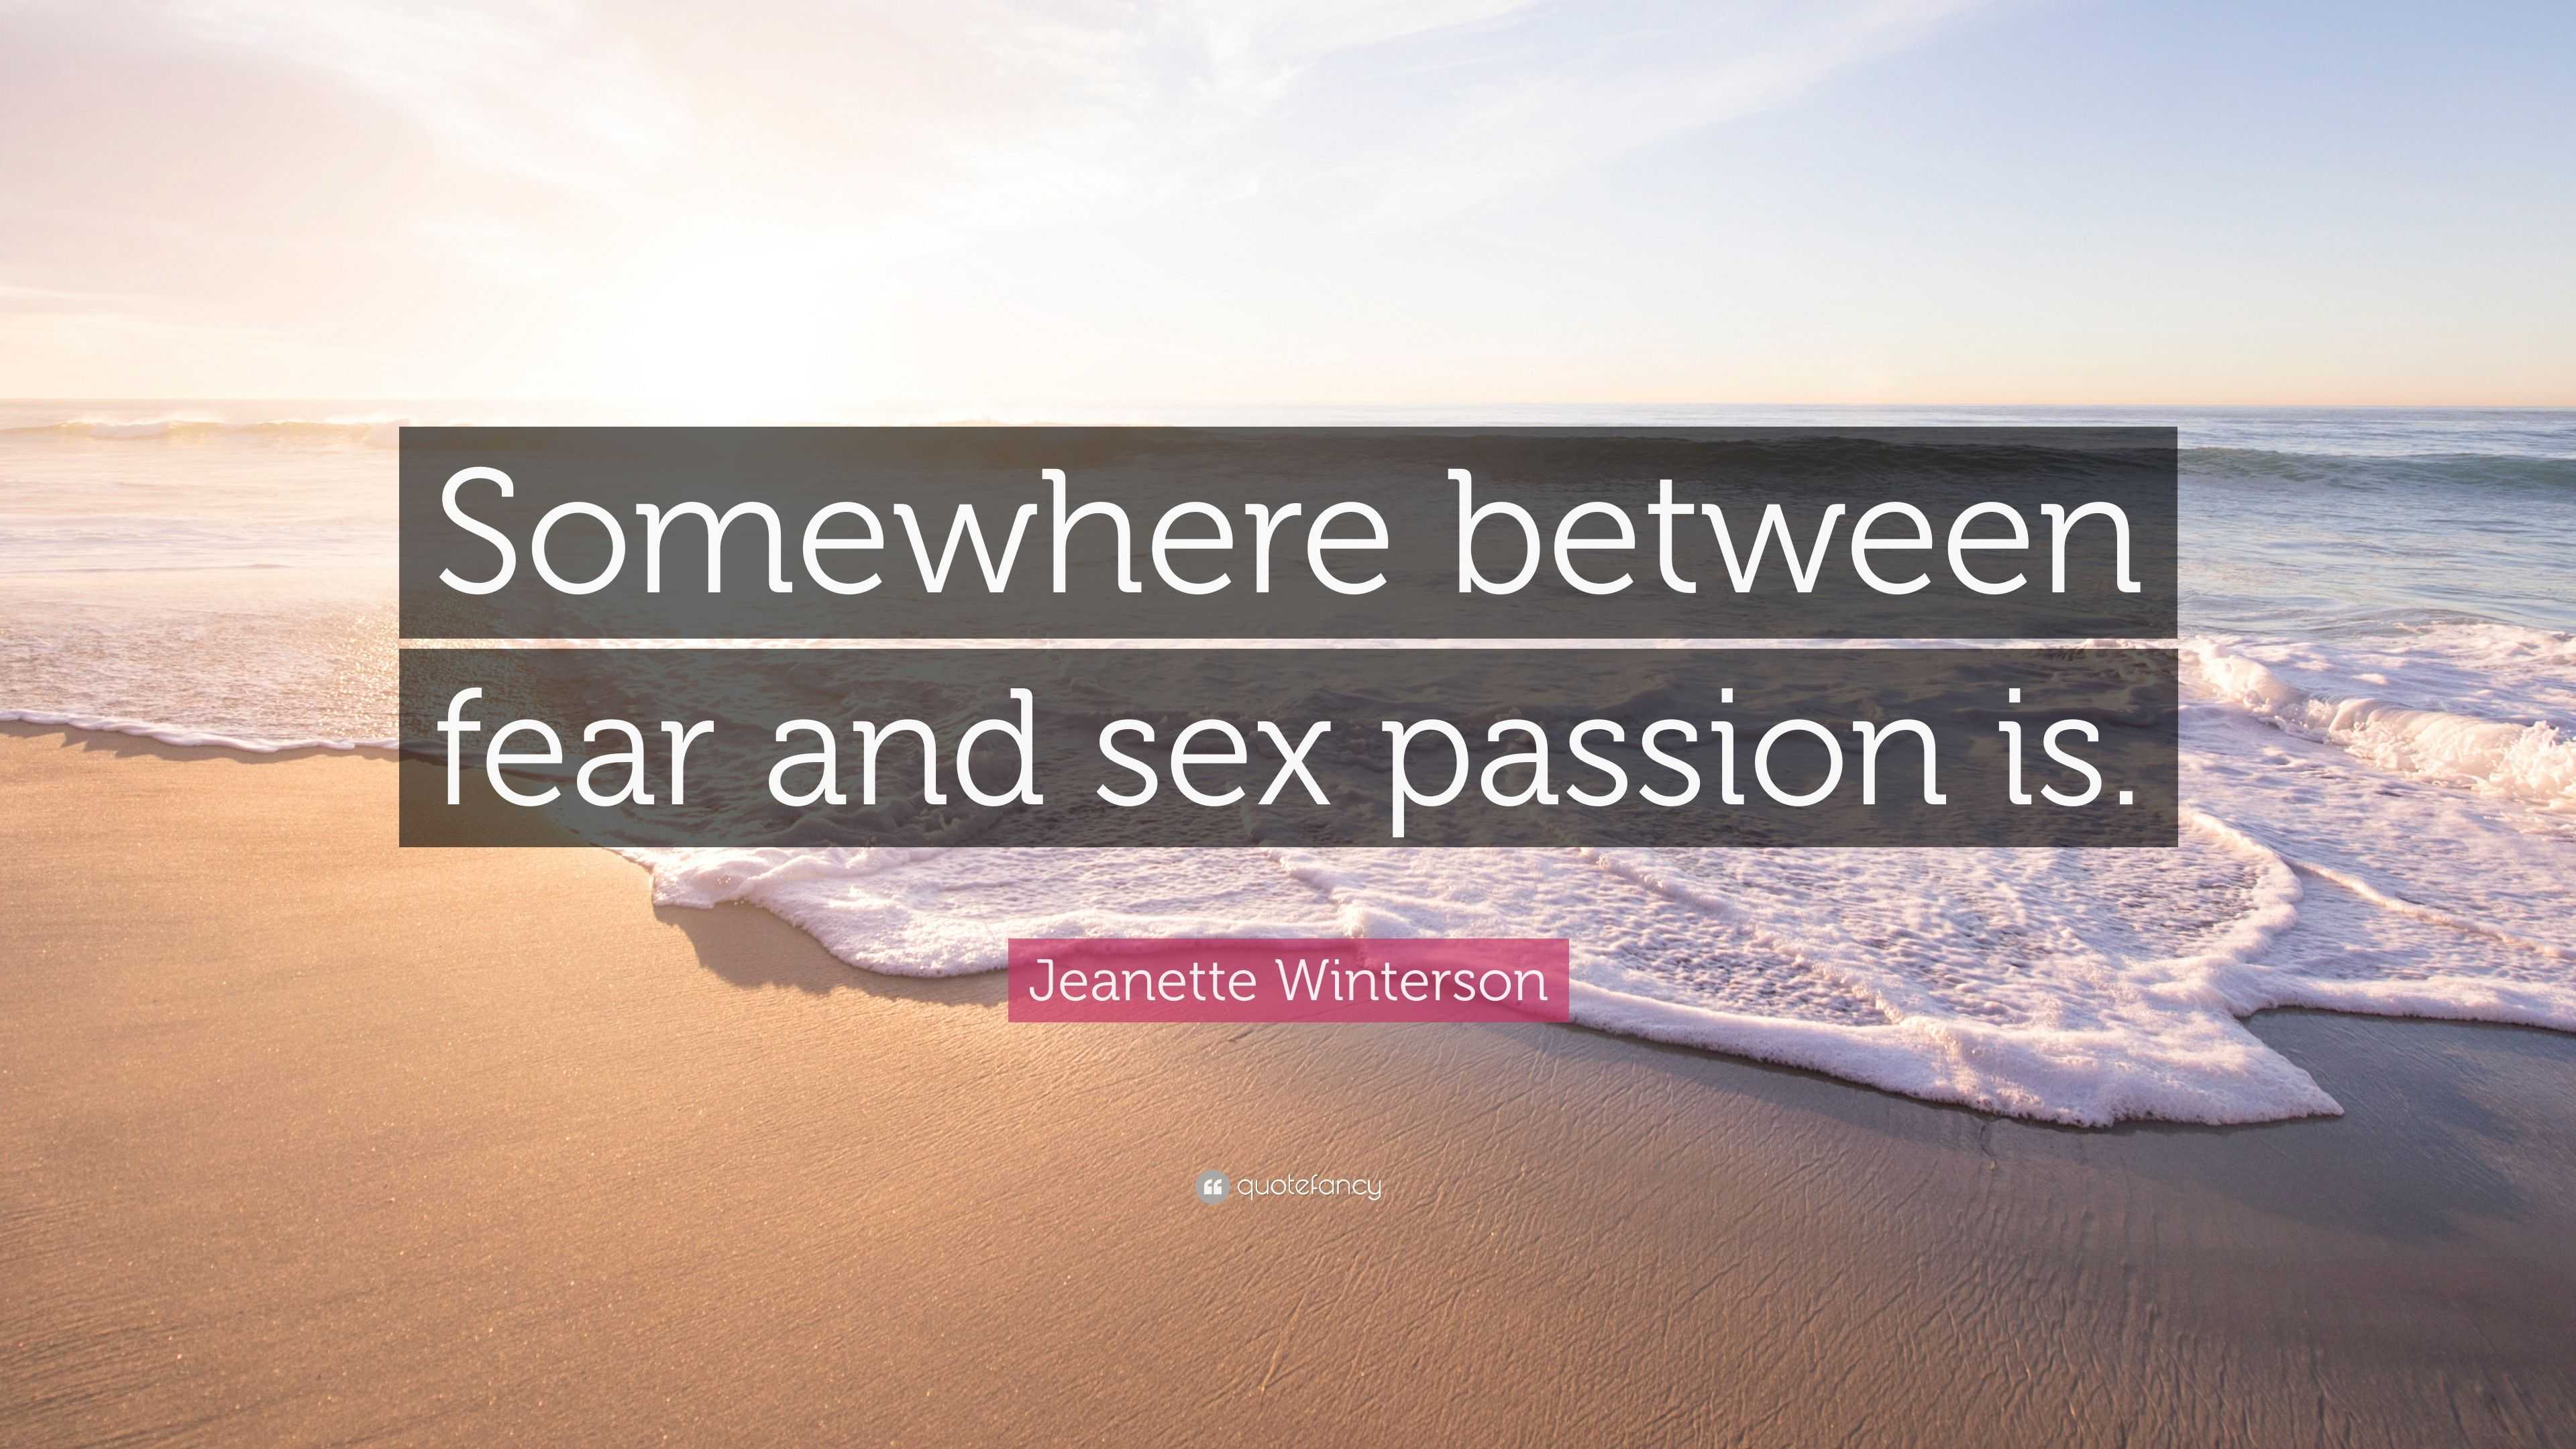 The Passion by Jeanette Winterson